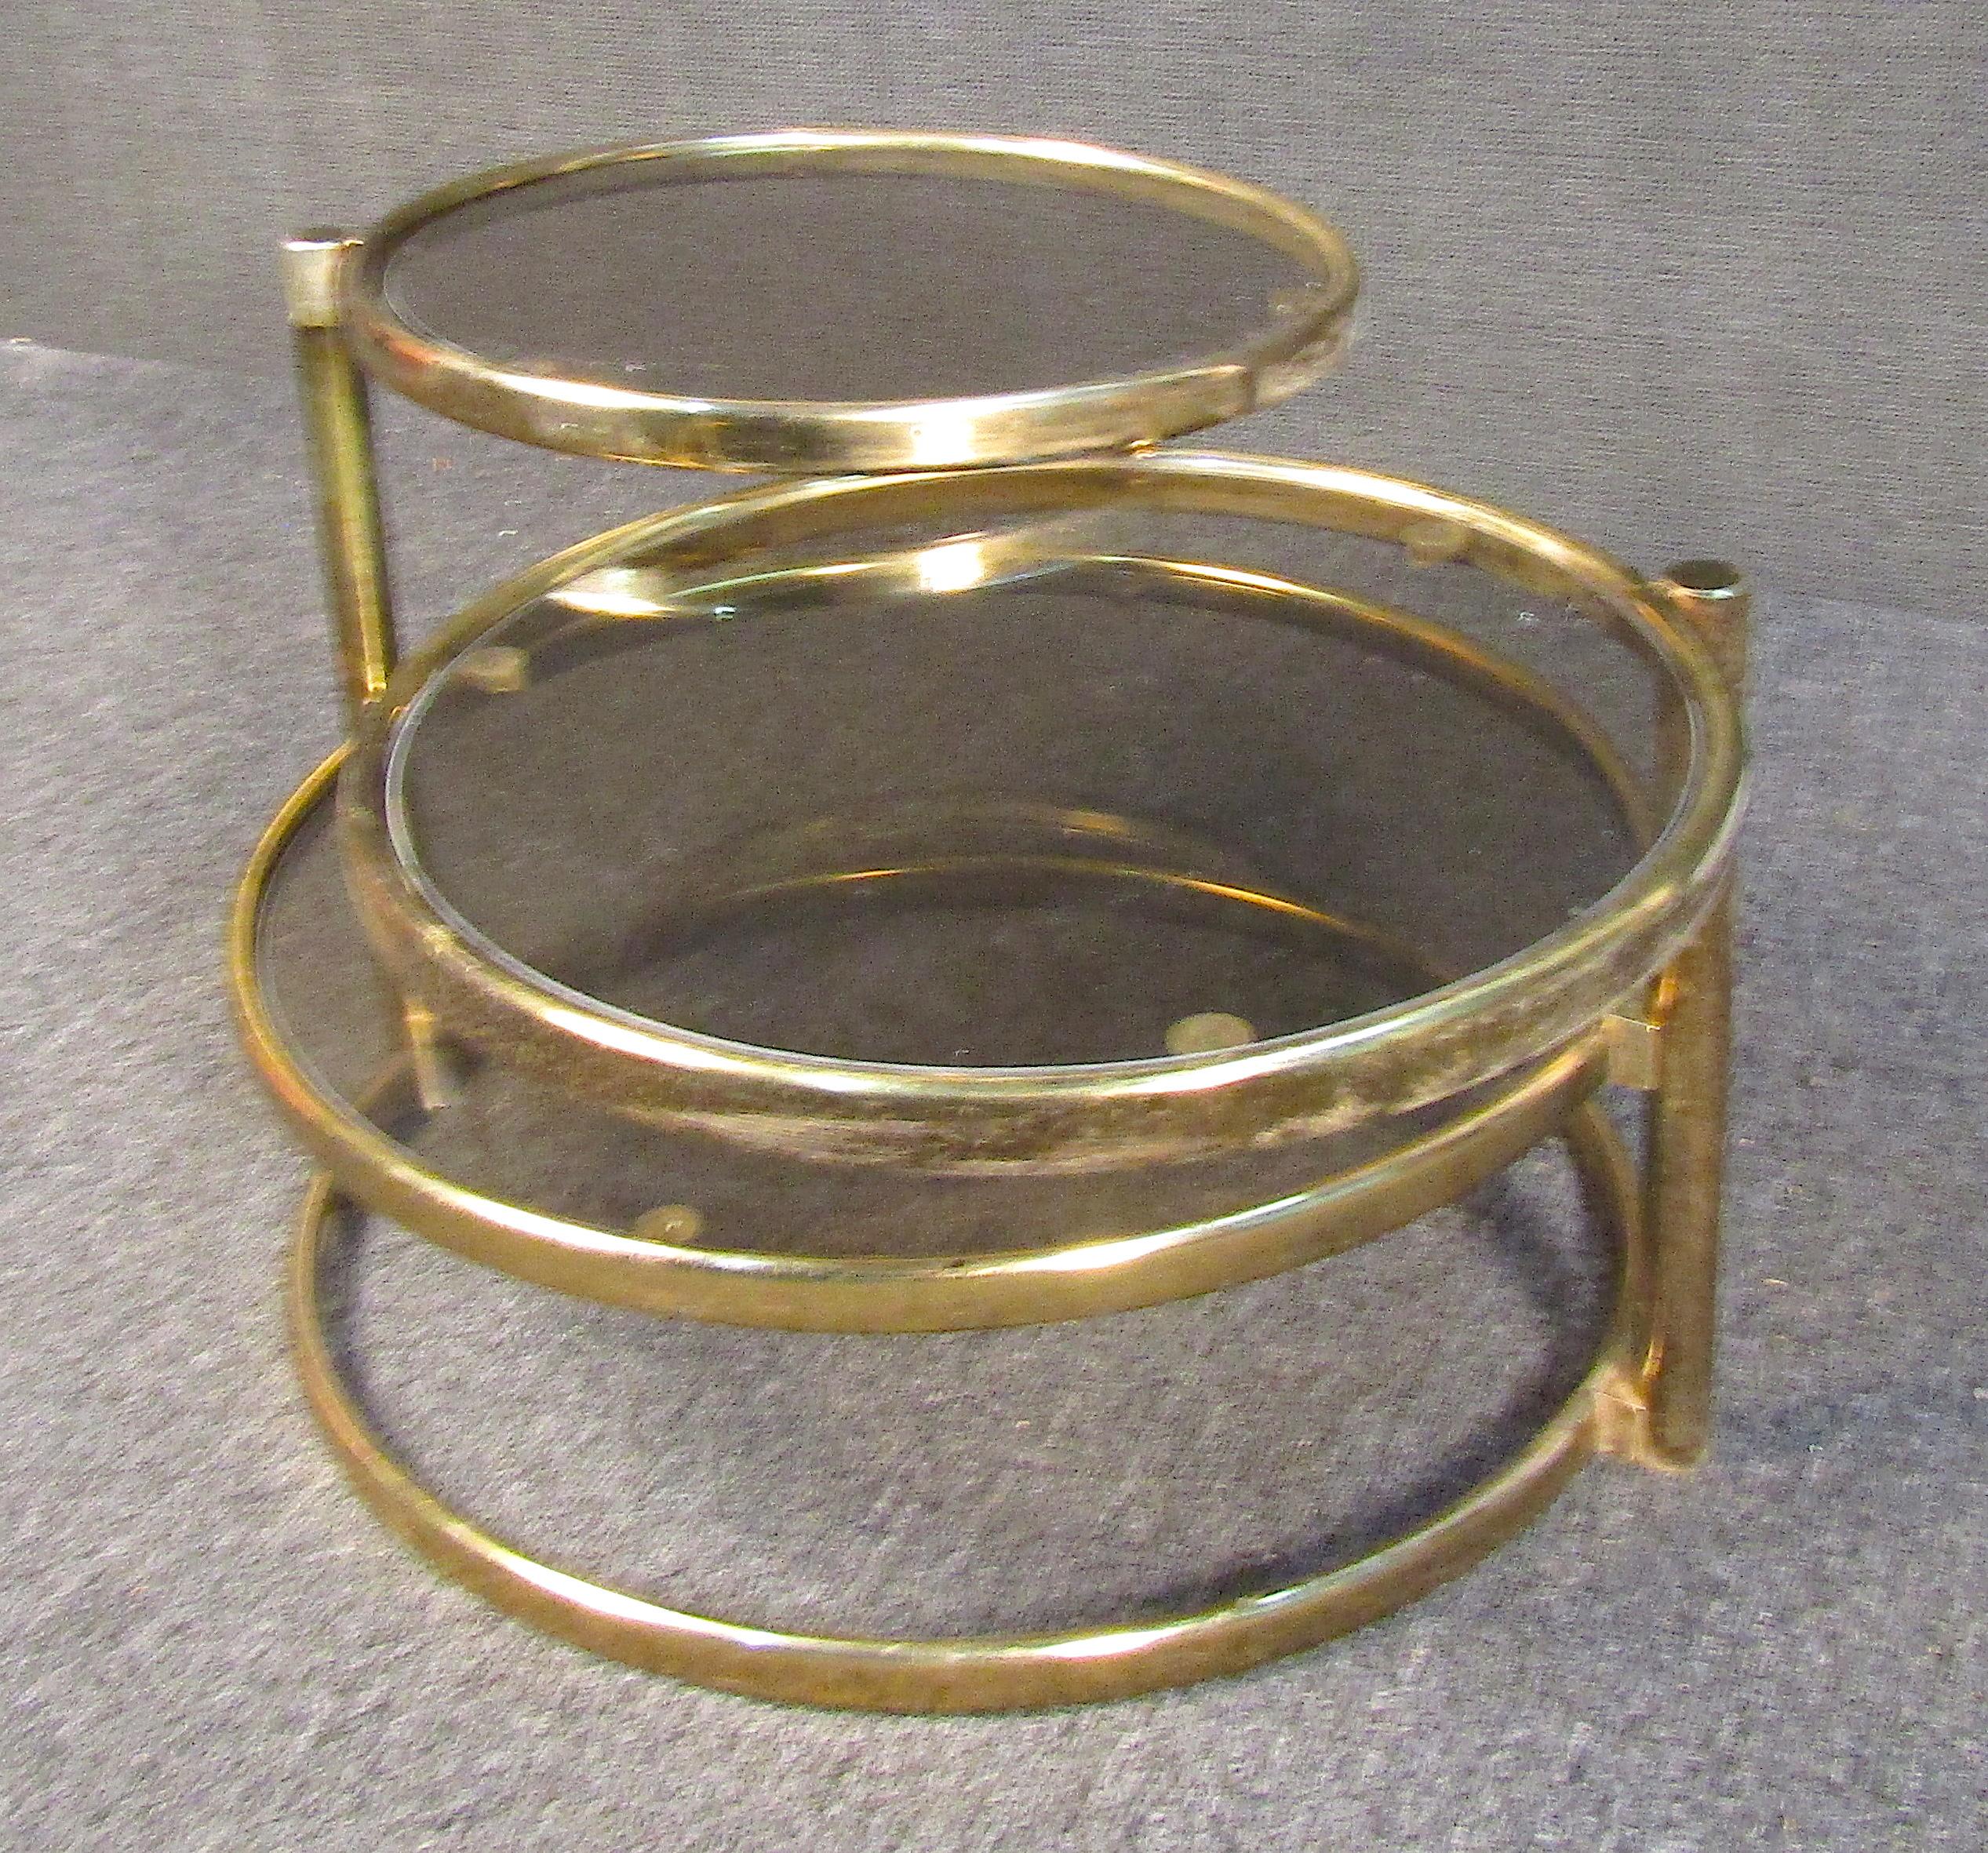 Unique Mid-Century Modern Adjustable Brass Hoop Table For Sale 3